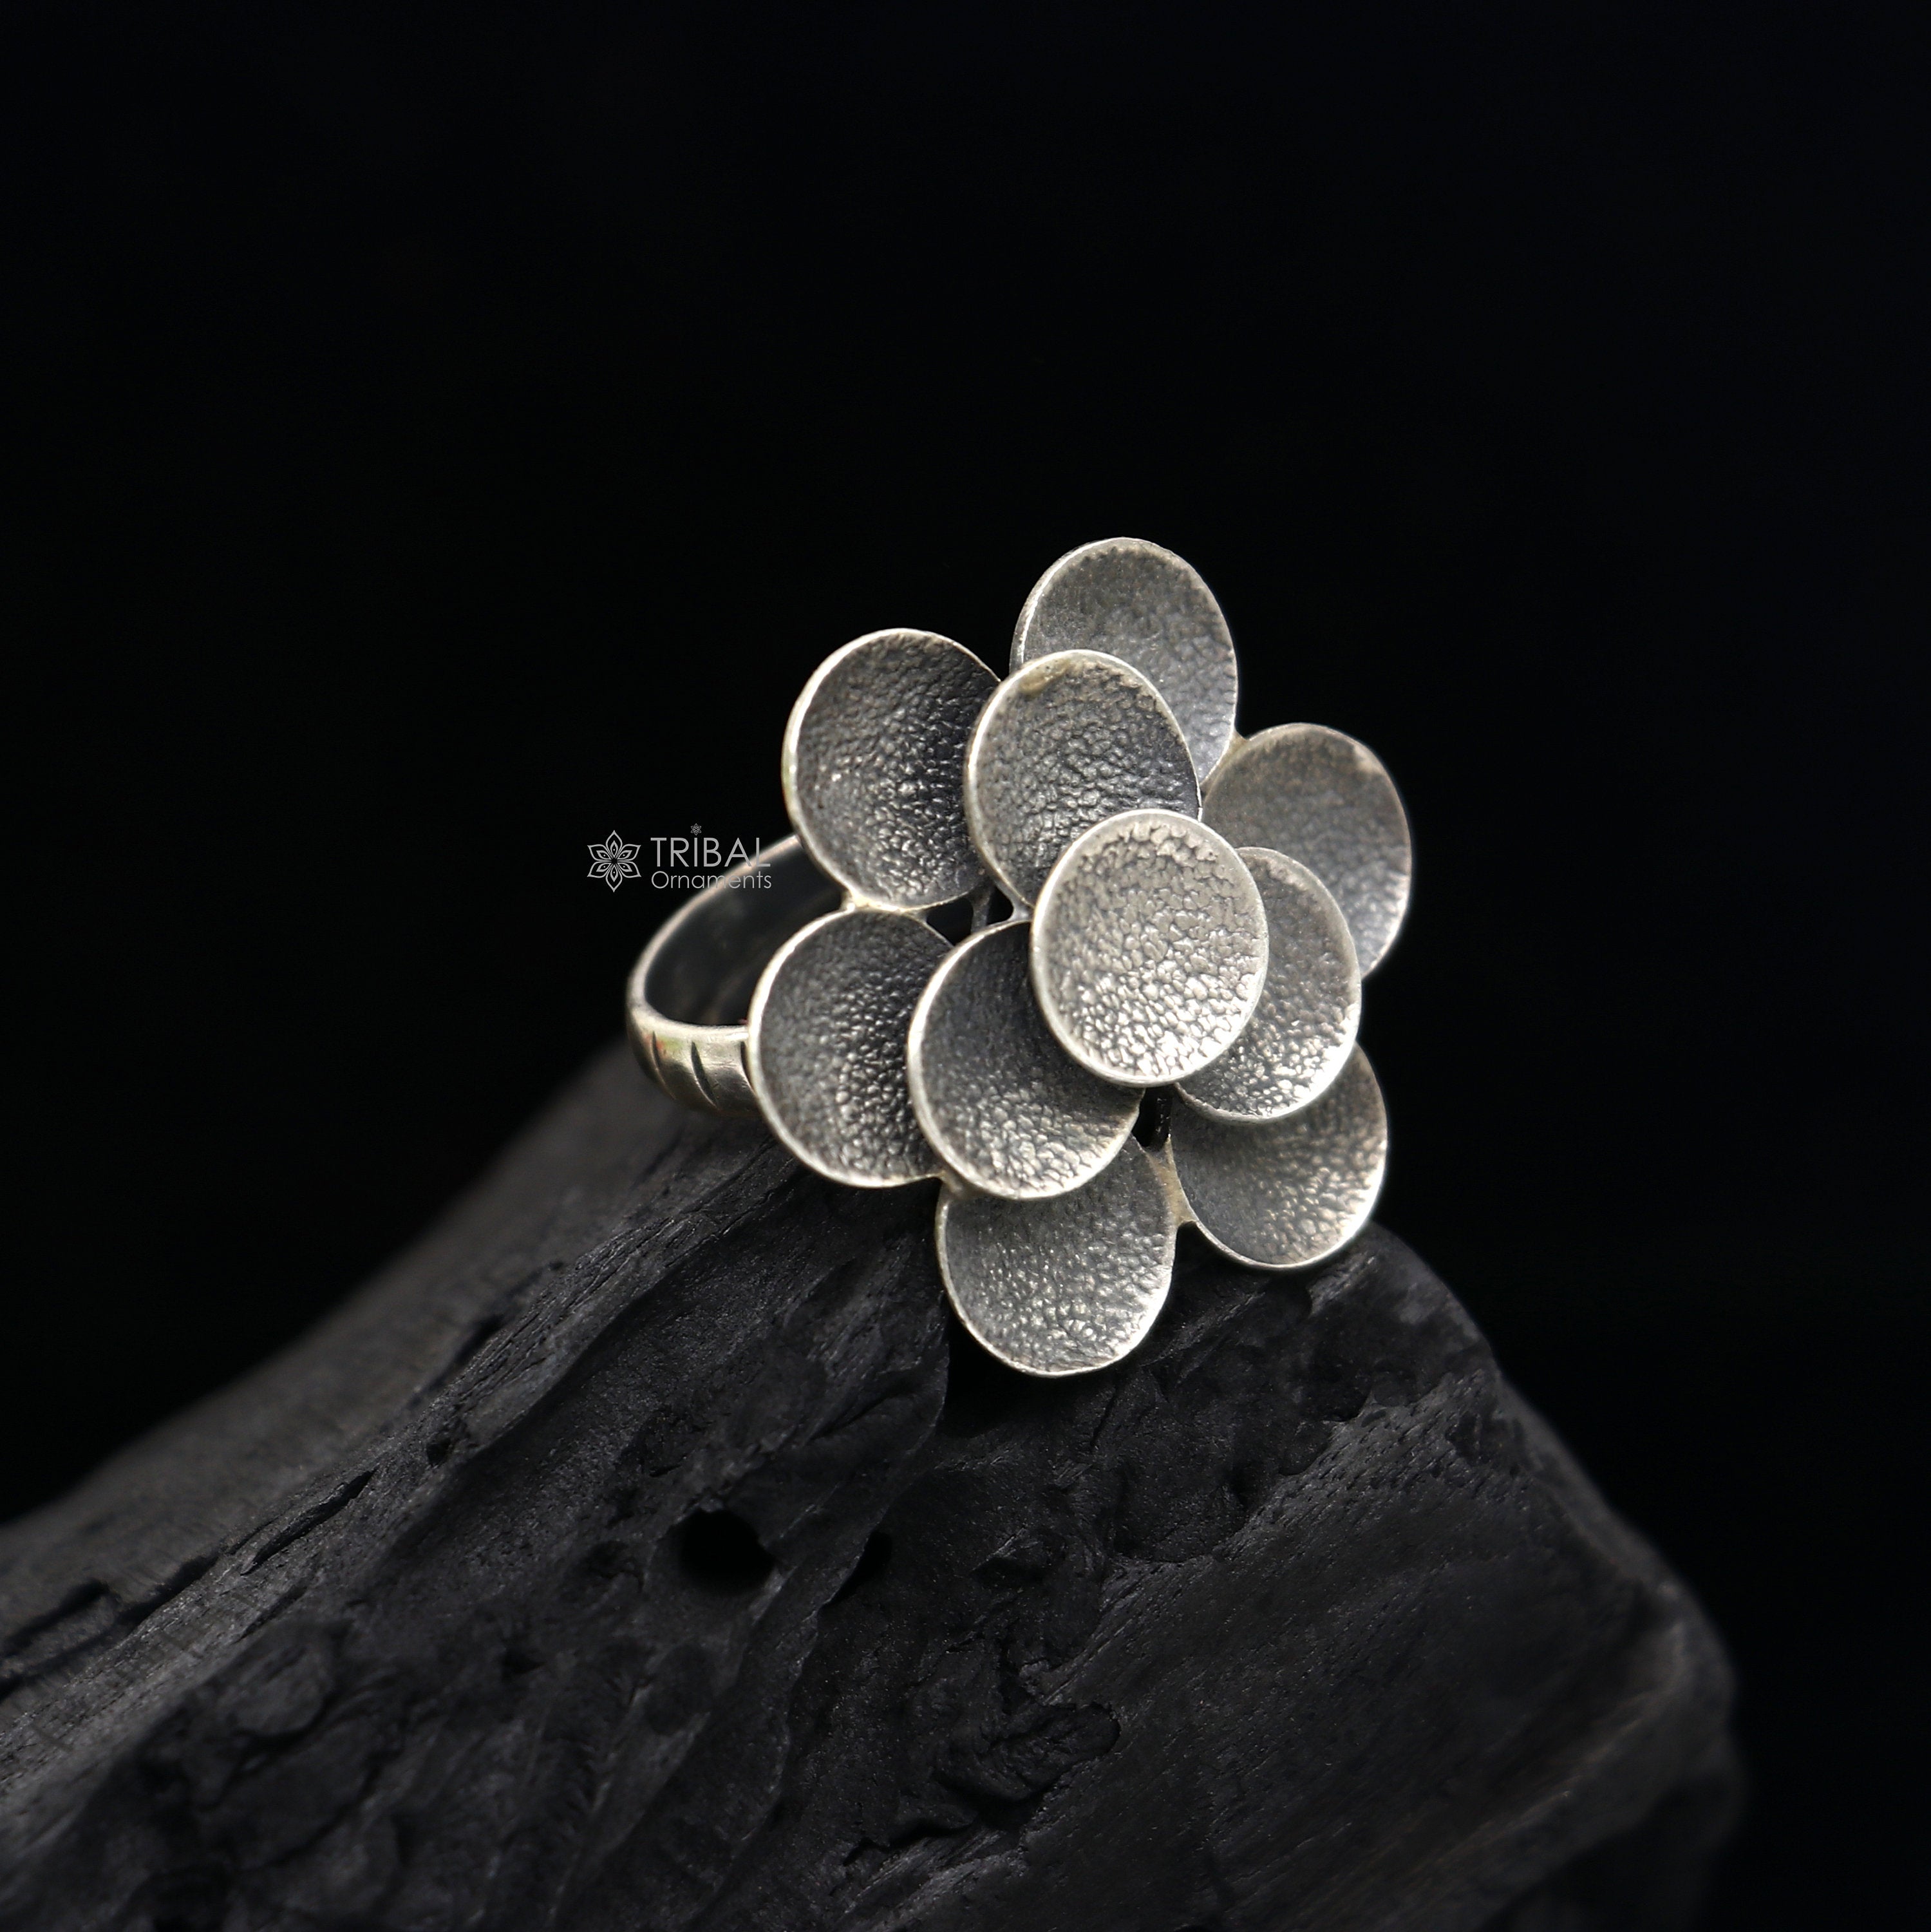 Buy Daisy Cluster Ring Online In India - Etsy India